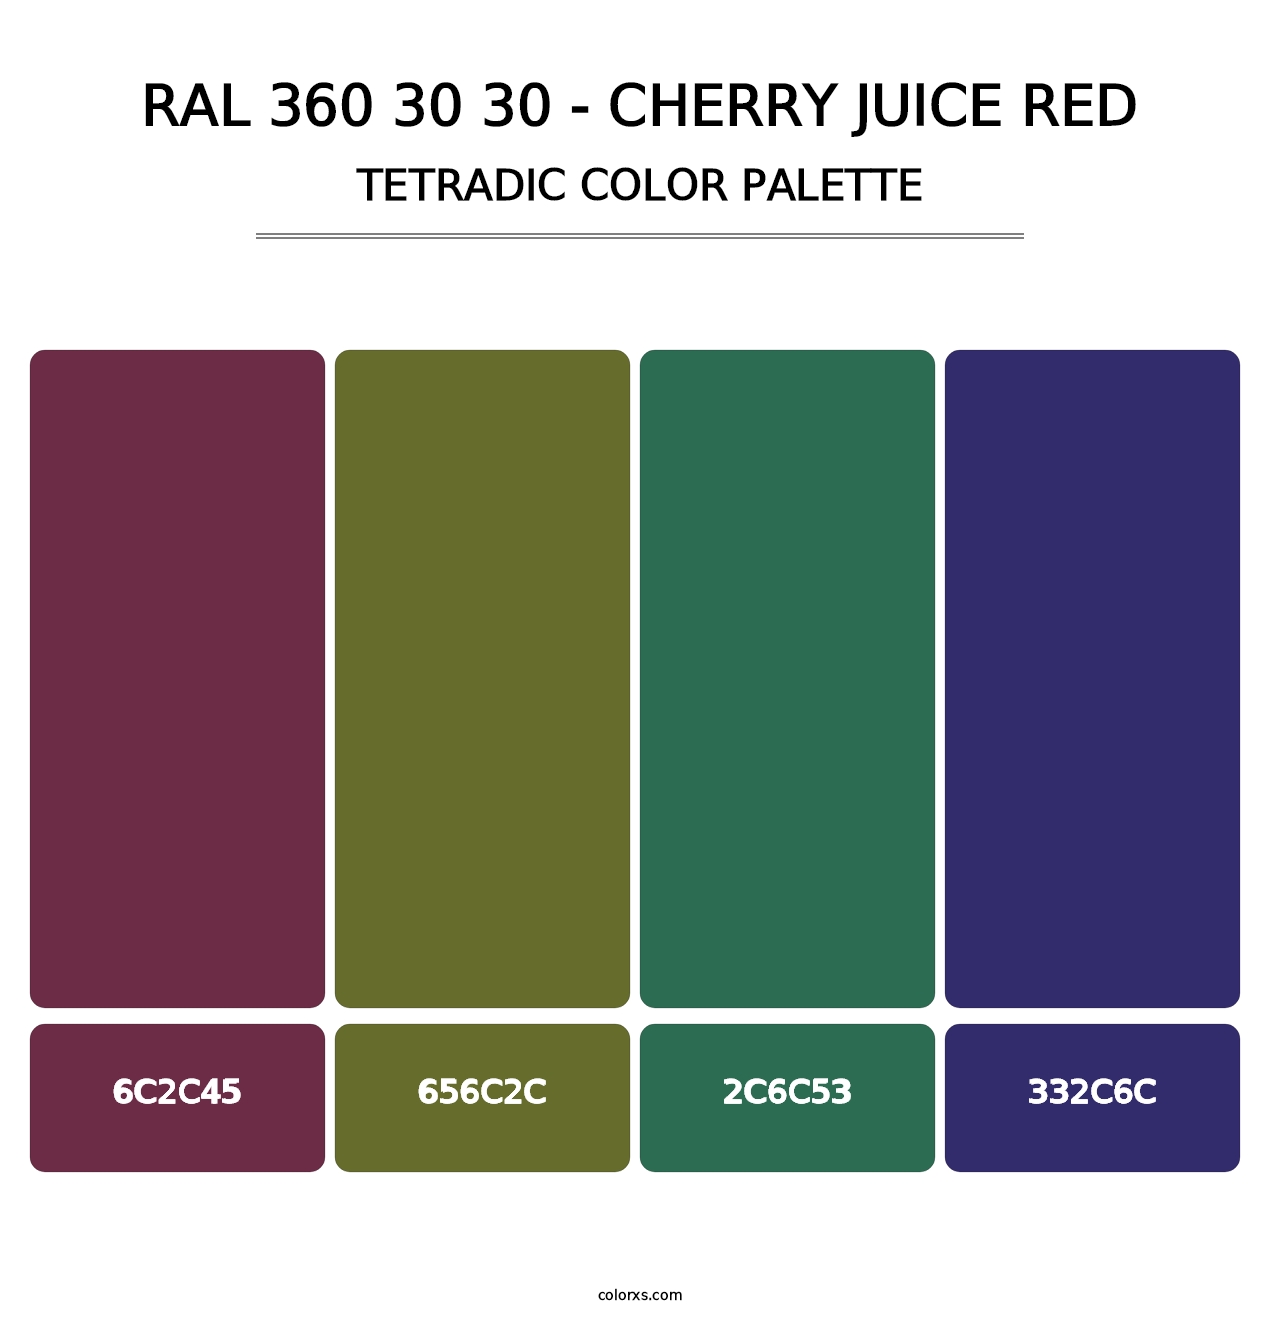 RAL 360 30 30 - Cherry Juice Red - Tetradic Color Palette